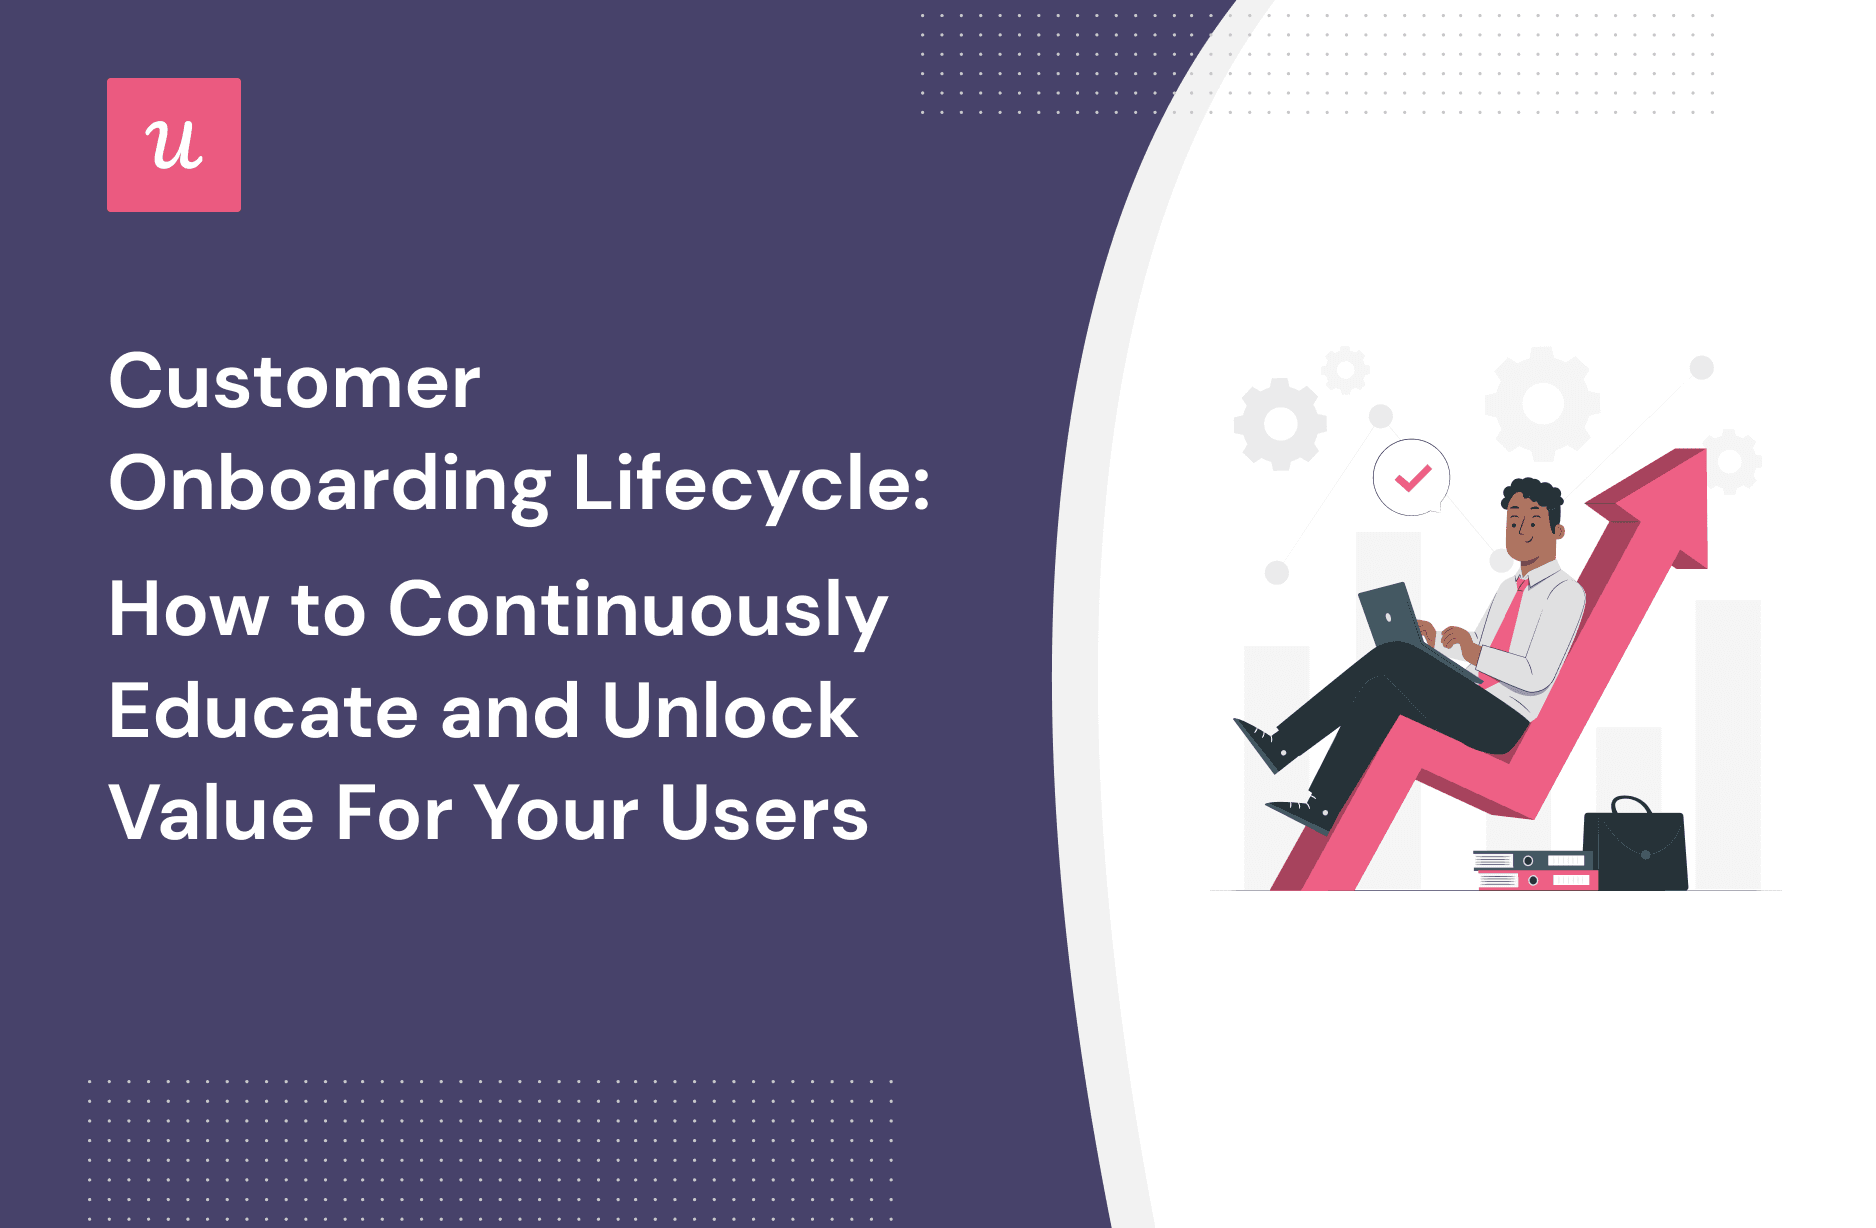 Customer Onboarding Lifecycle: How to Continuously Educate and Unlock Value For Your Users cover